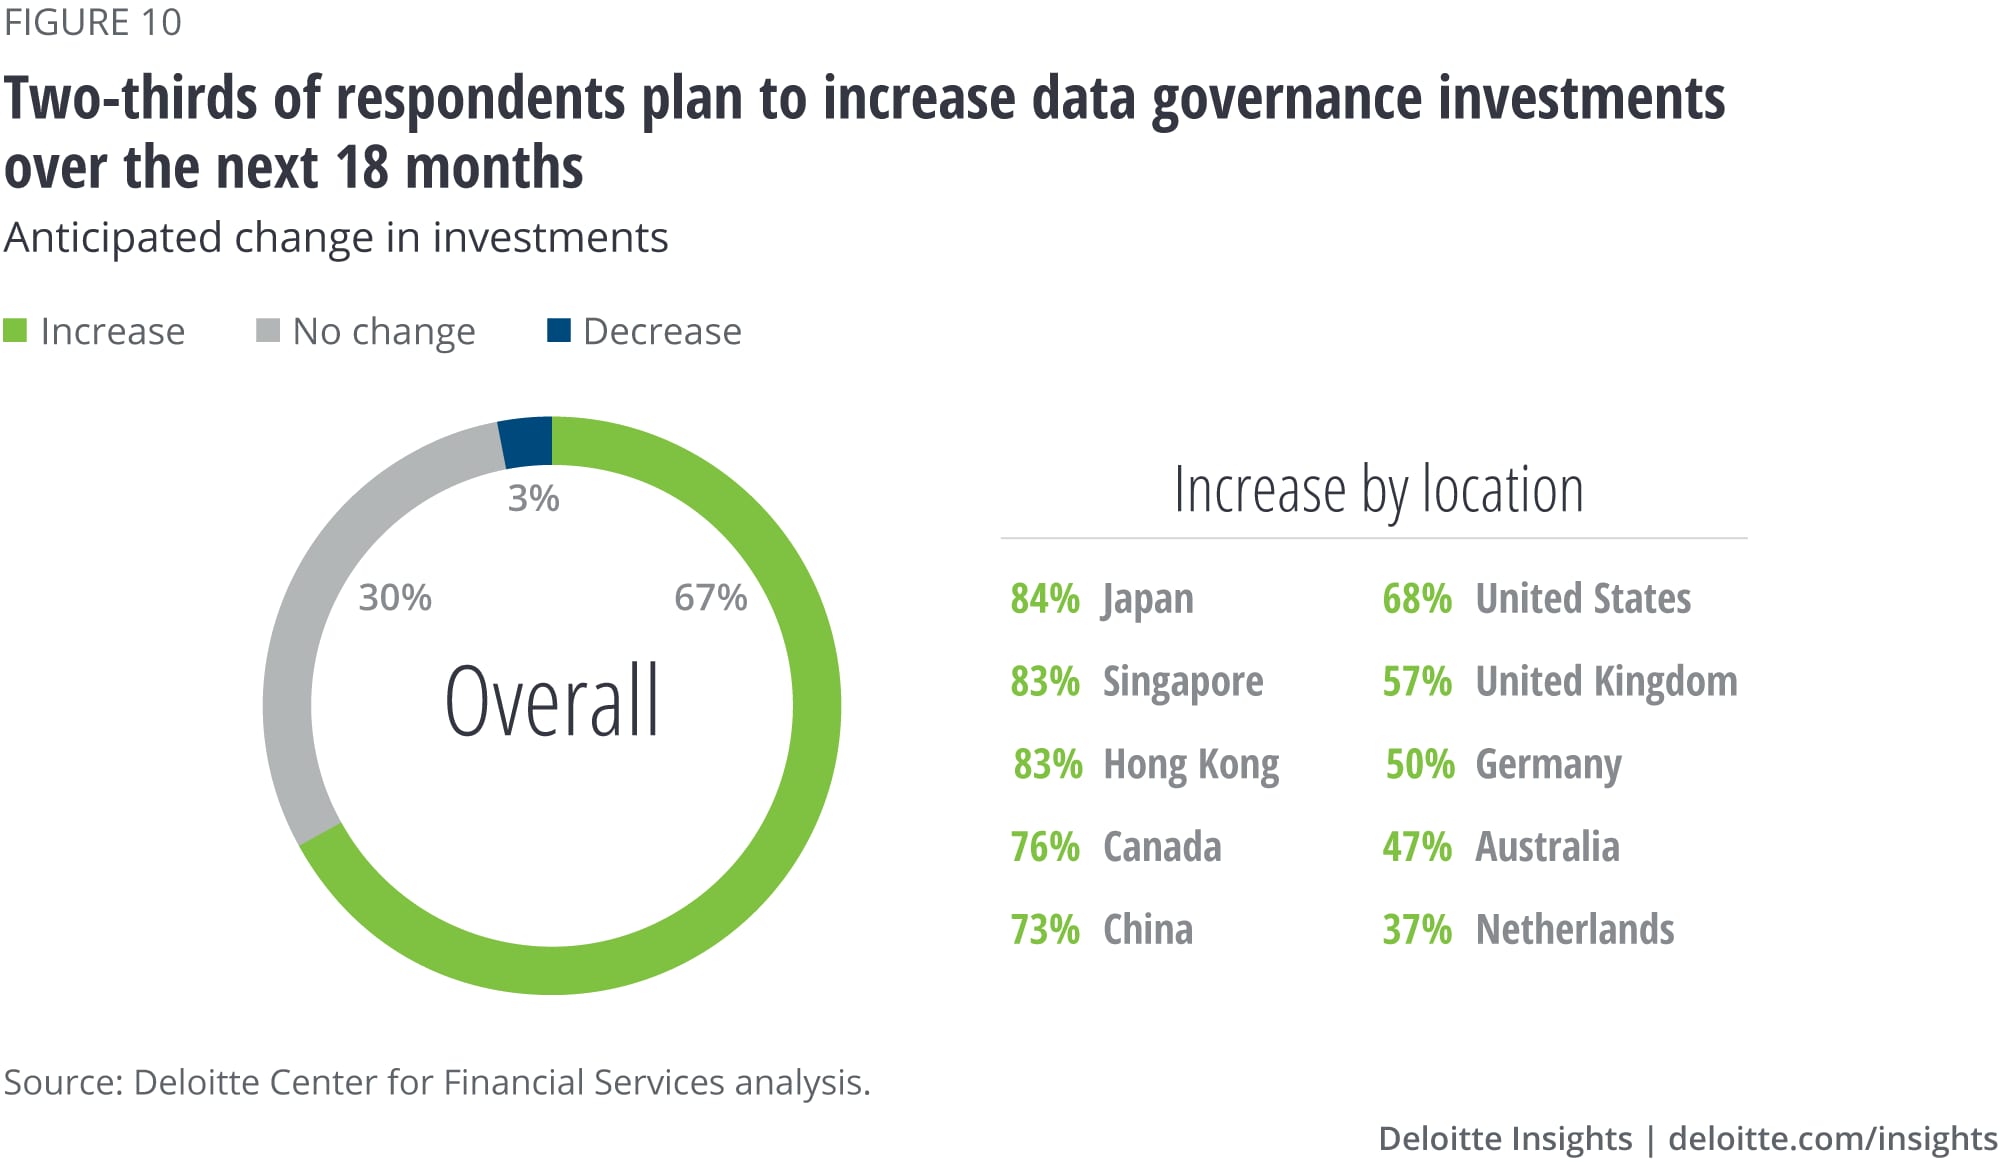 Two-thirds of respondents plan to increase data governance investments over the next 18 months